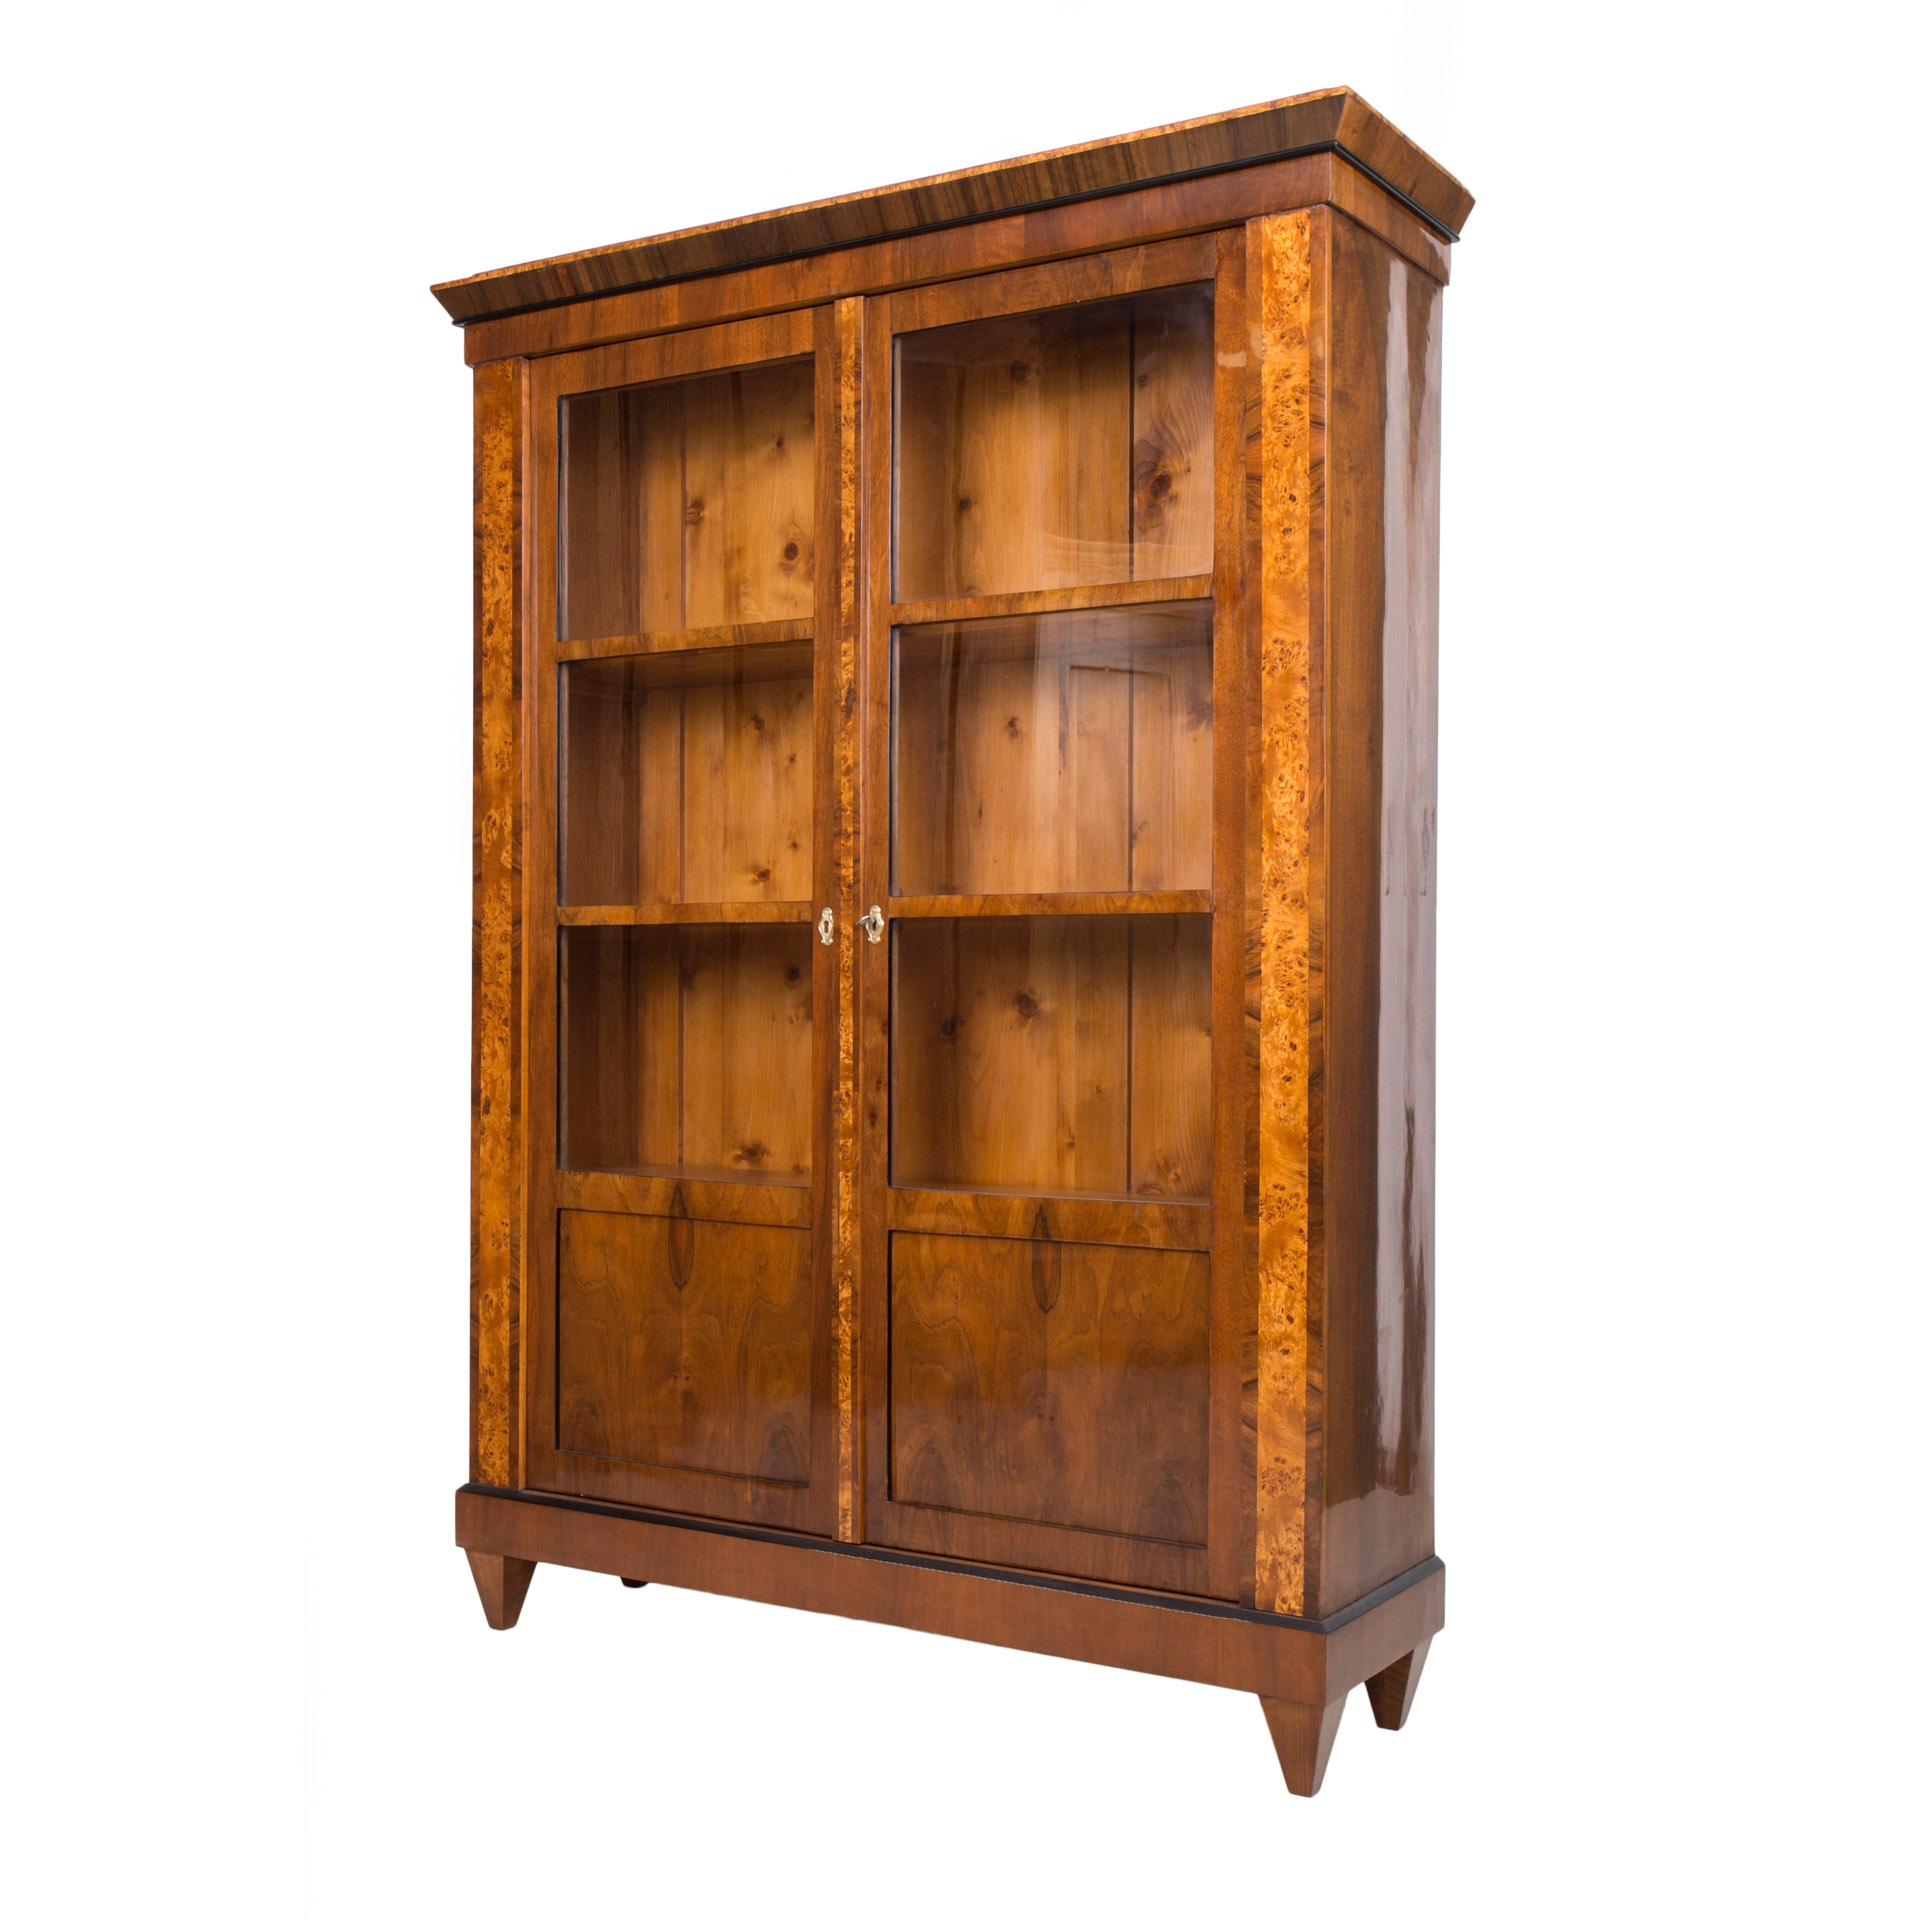 This Biedermeier vitrine comes from Germany and was made in 19th century. It is made of coniferous wood, veneered with walnut. It has undergone a professional renovation process. The surface is finished with shellac polish, applied by hand, which